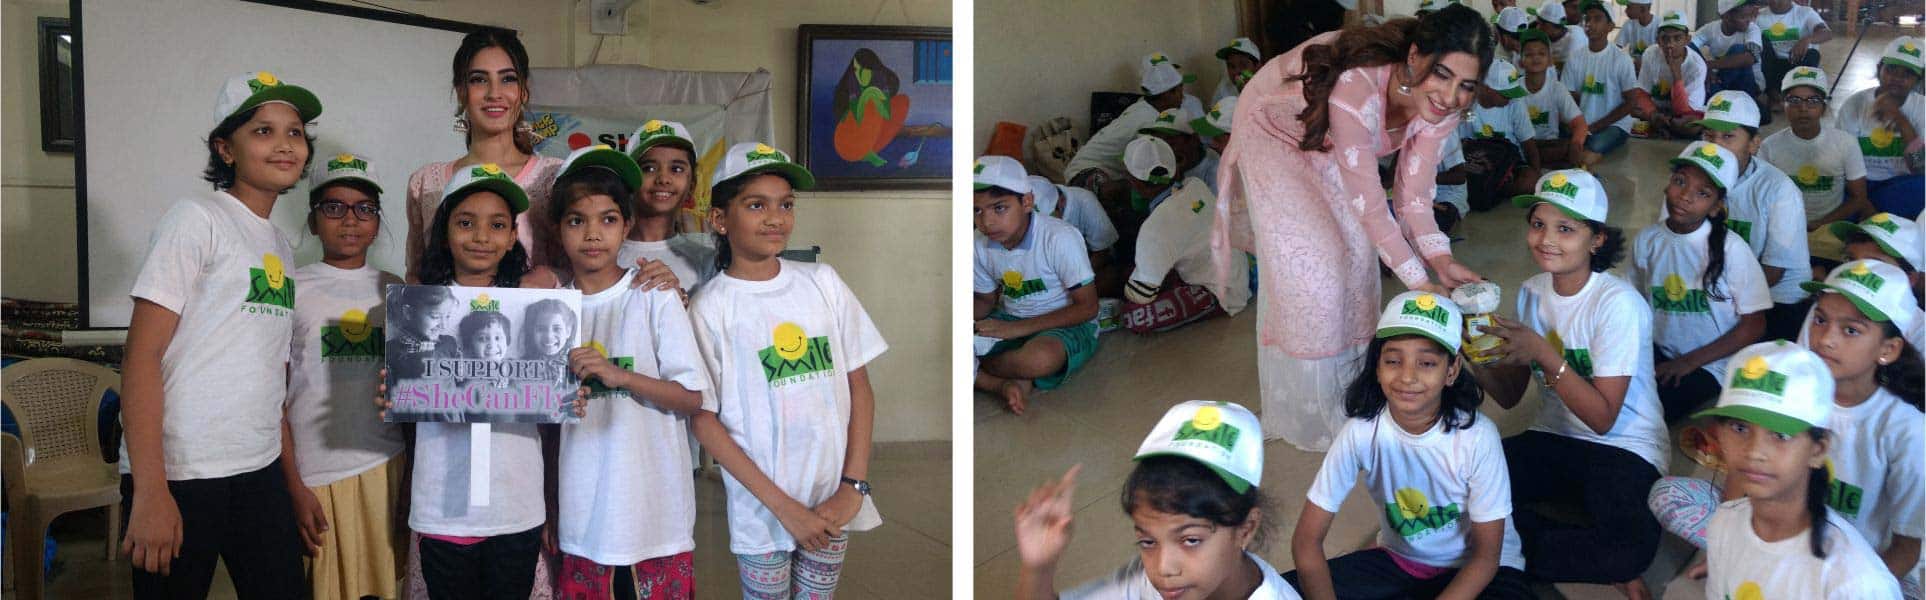 Actress Karishma Sharma spends a fun filled day with Mission Education children